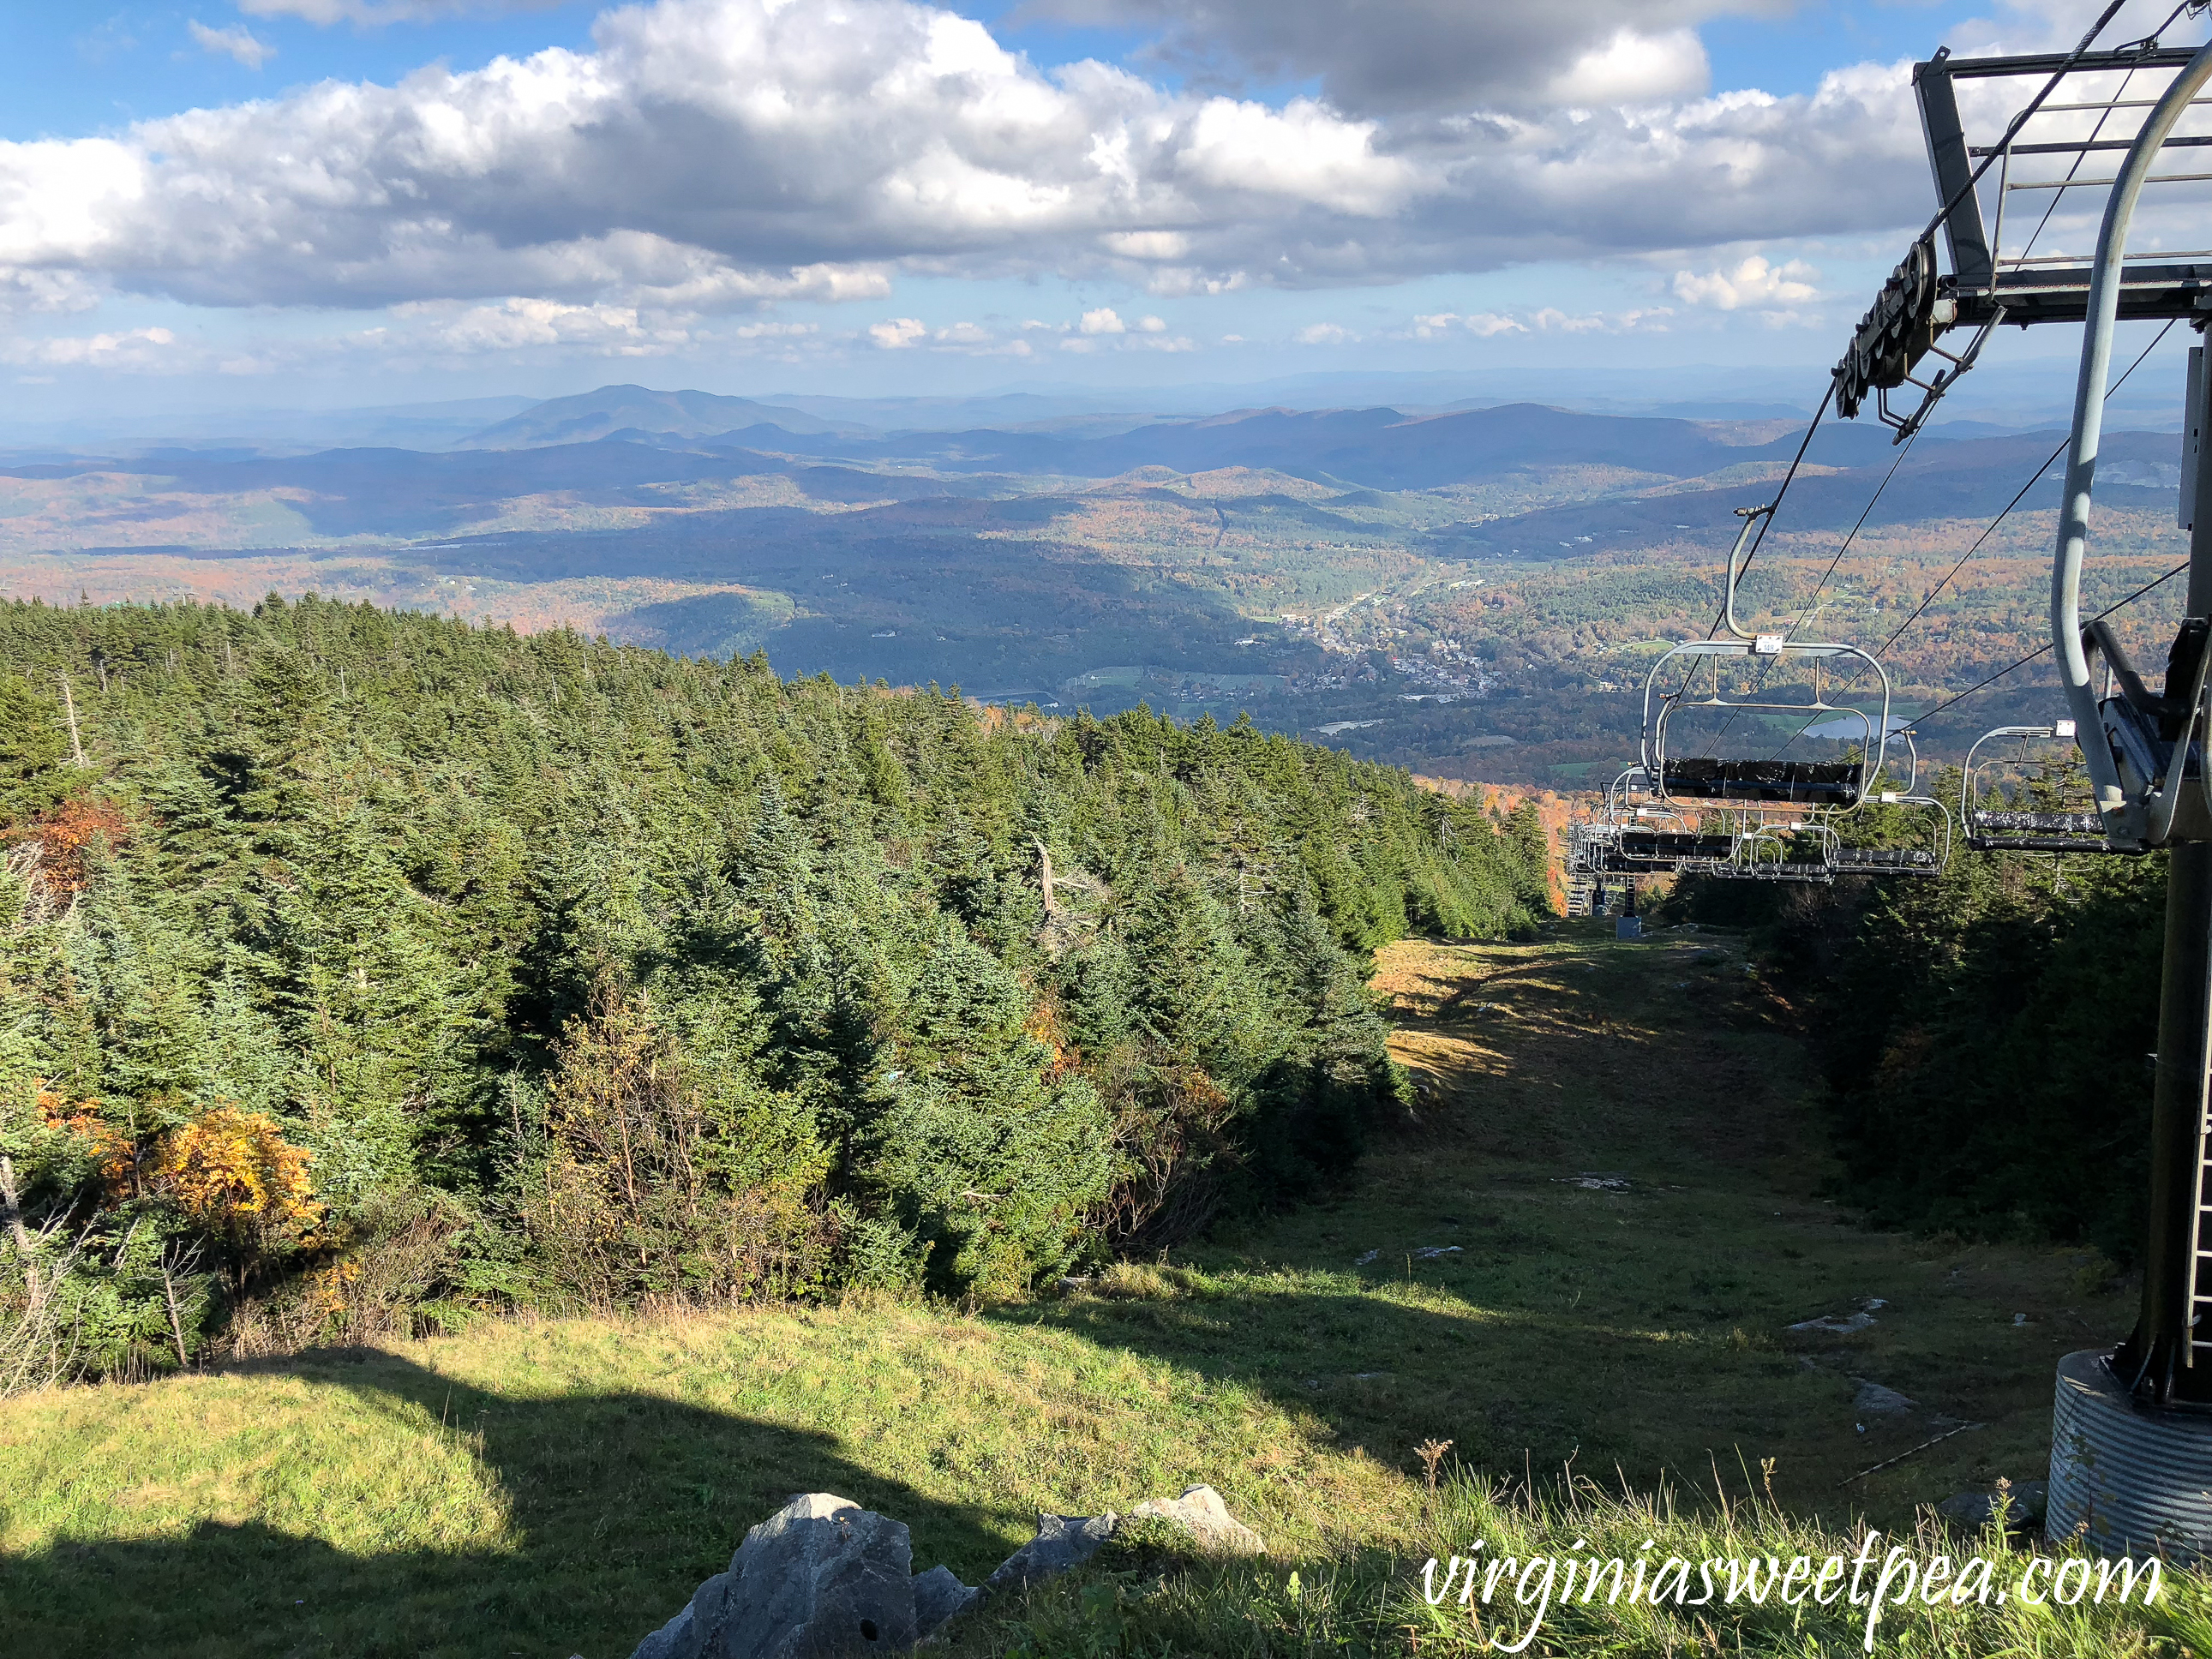 Leaf peeping in Vermont - View from the top of Okemo Mountain #vermont #fallinvermont #okemo #ludlow